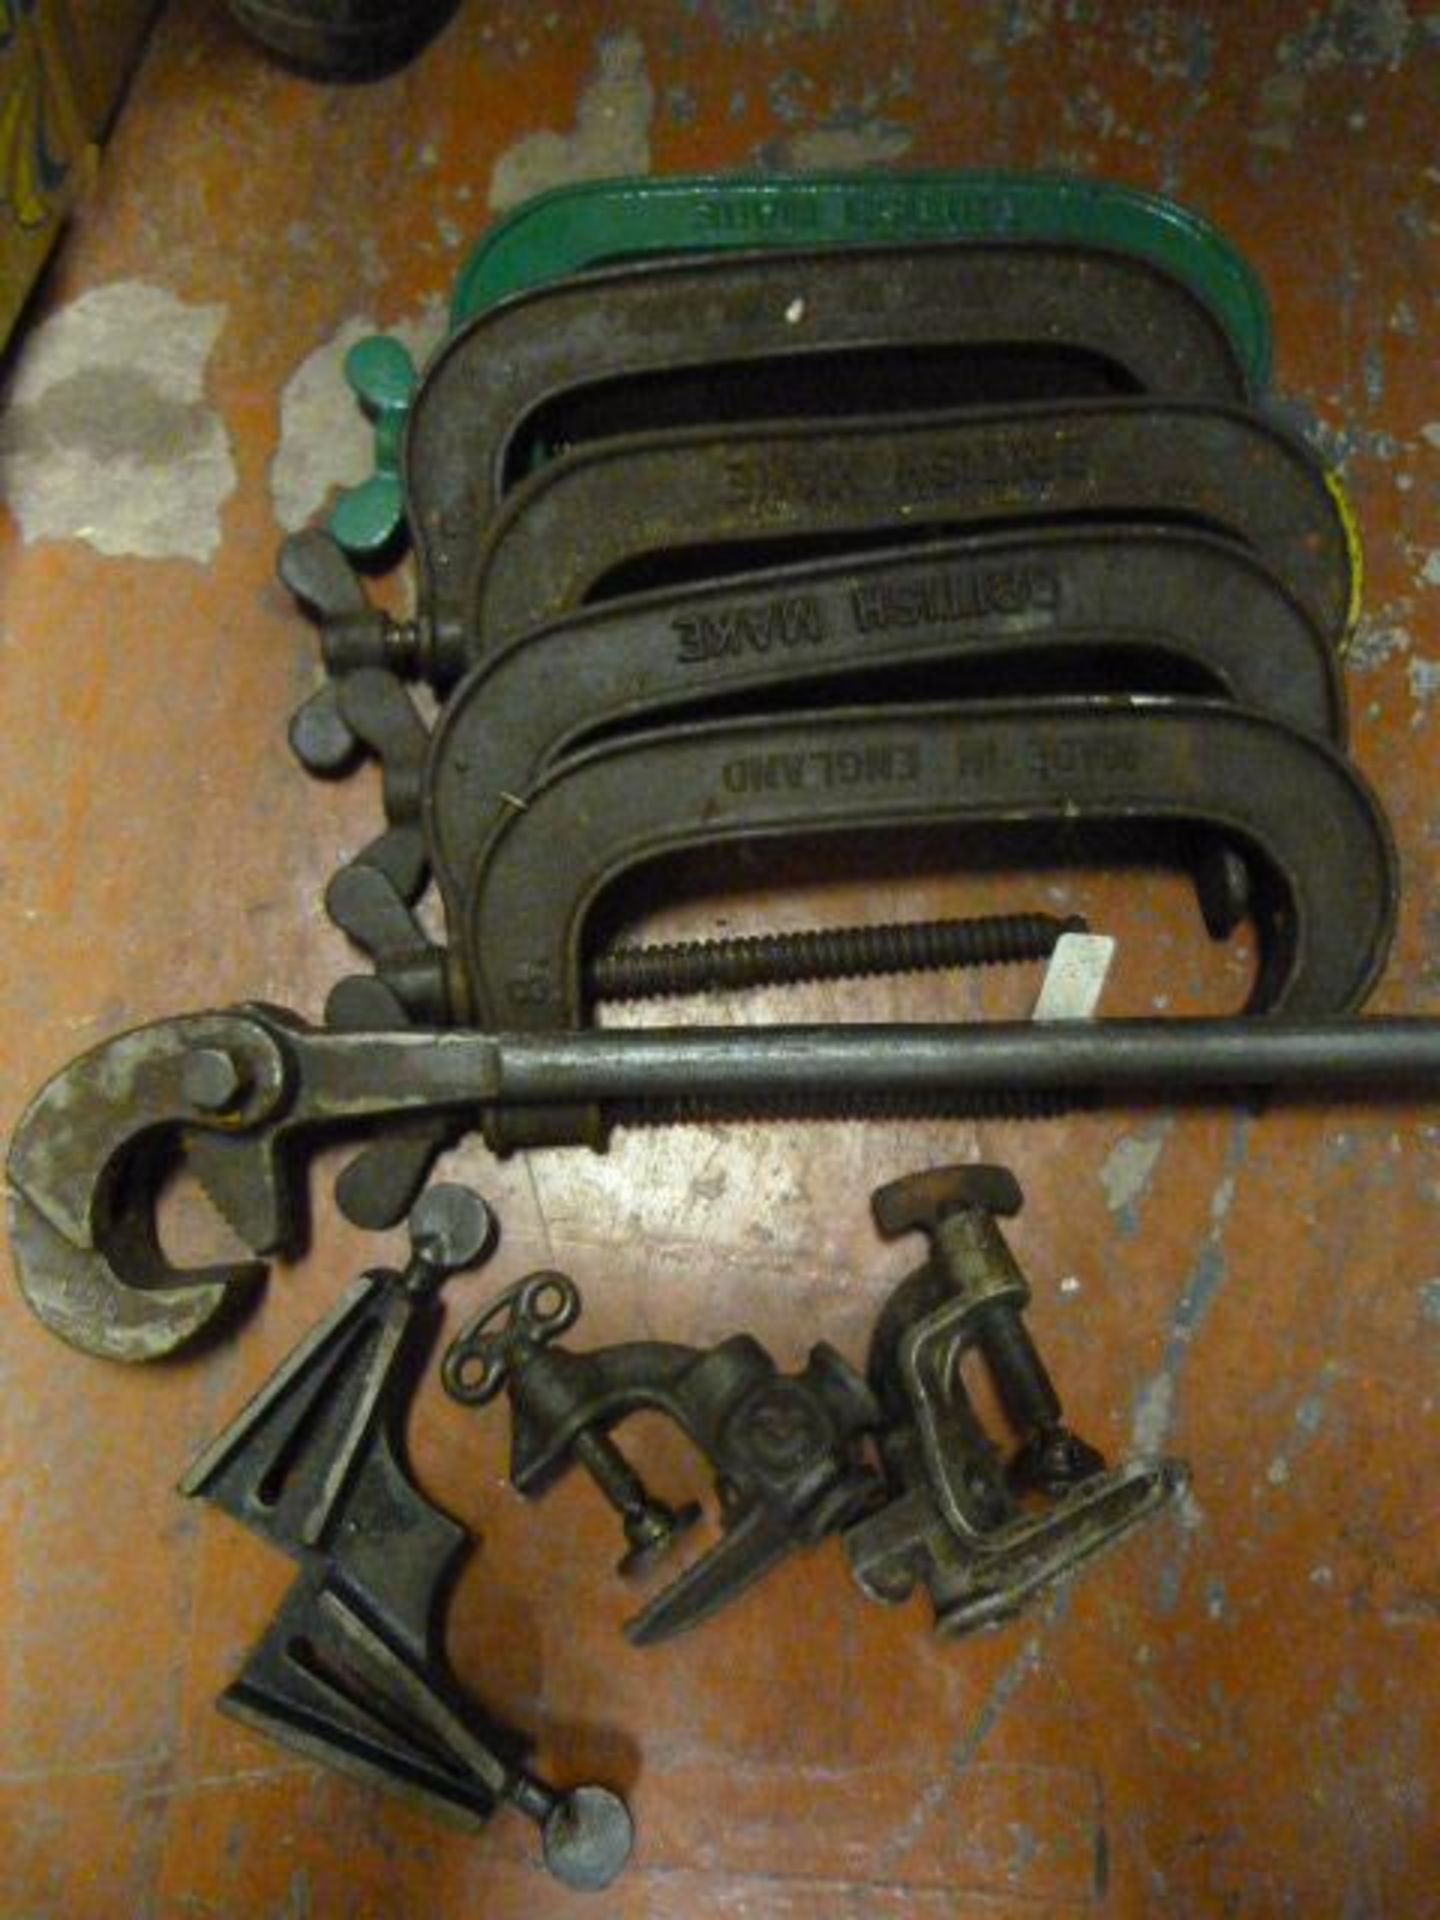 Quantity of G and Other Clamps and a Pipe Wrench